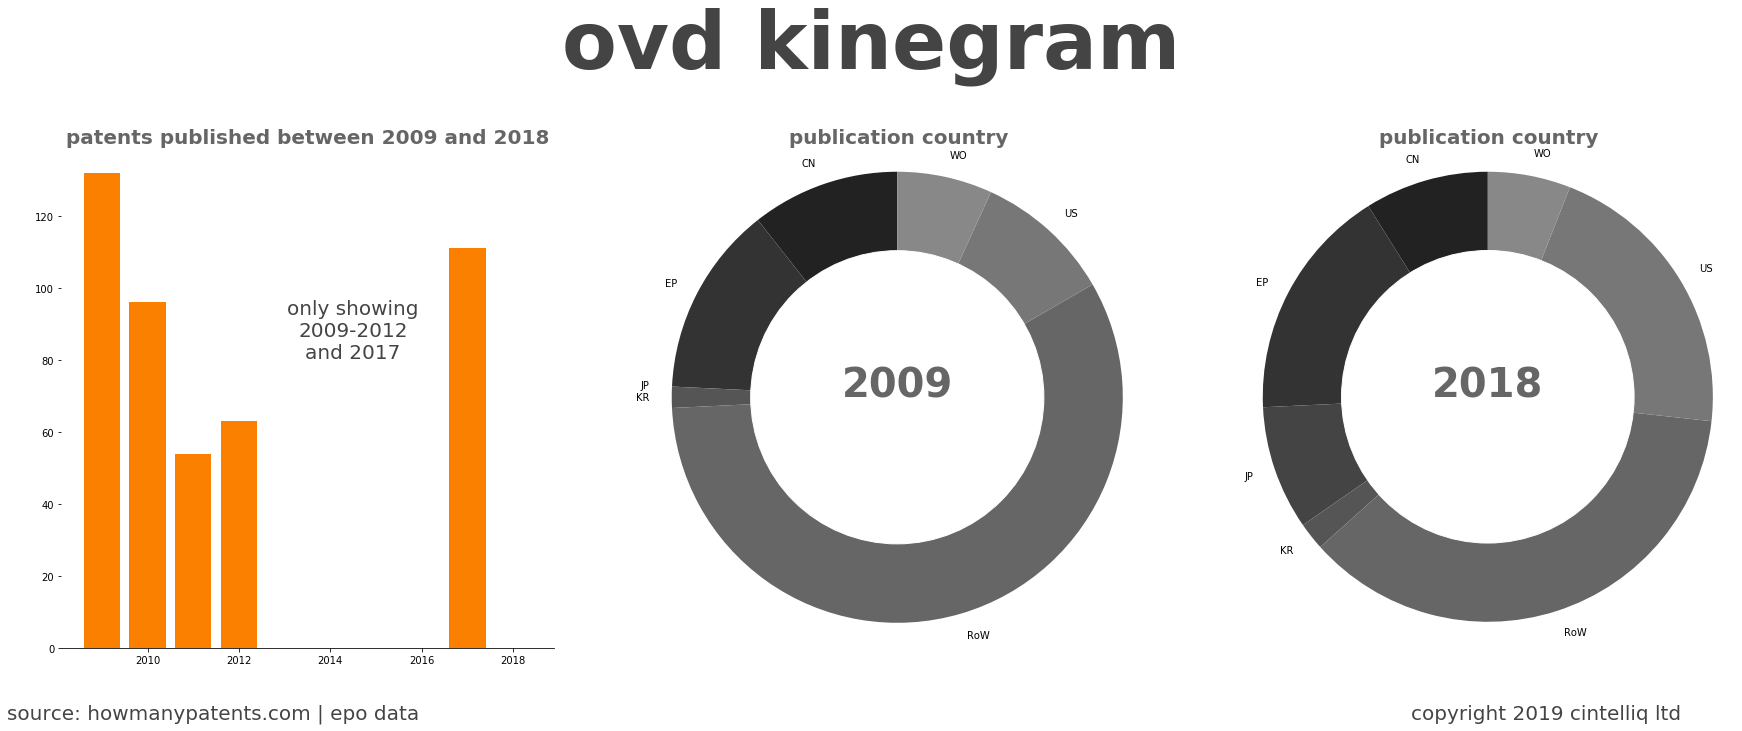 summary of patents for Ovd Kinegram